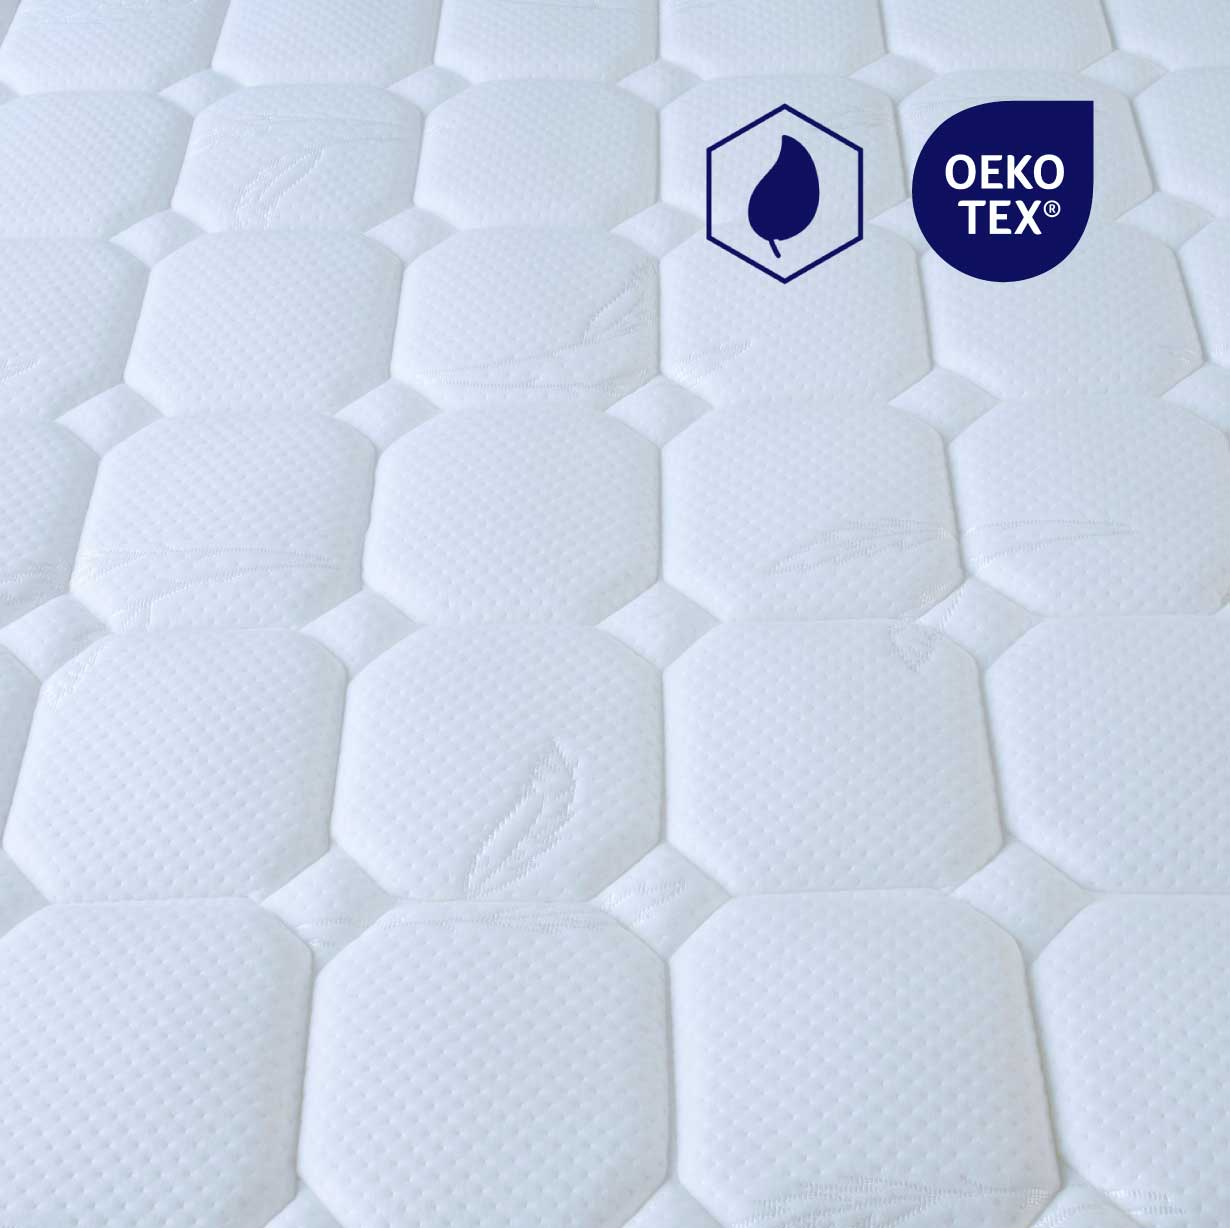 Mattress Fabric Quilted Cover Sample with OEKO-TEX logos